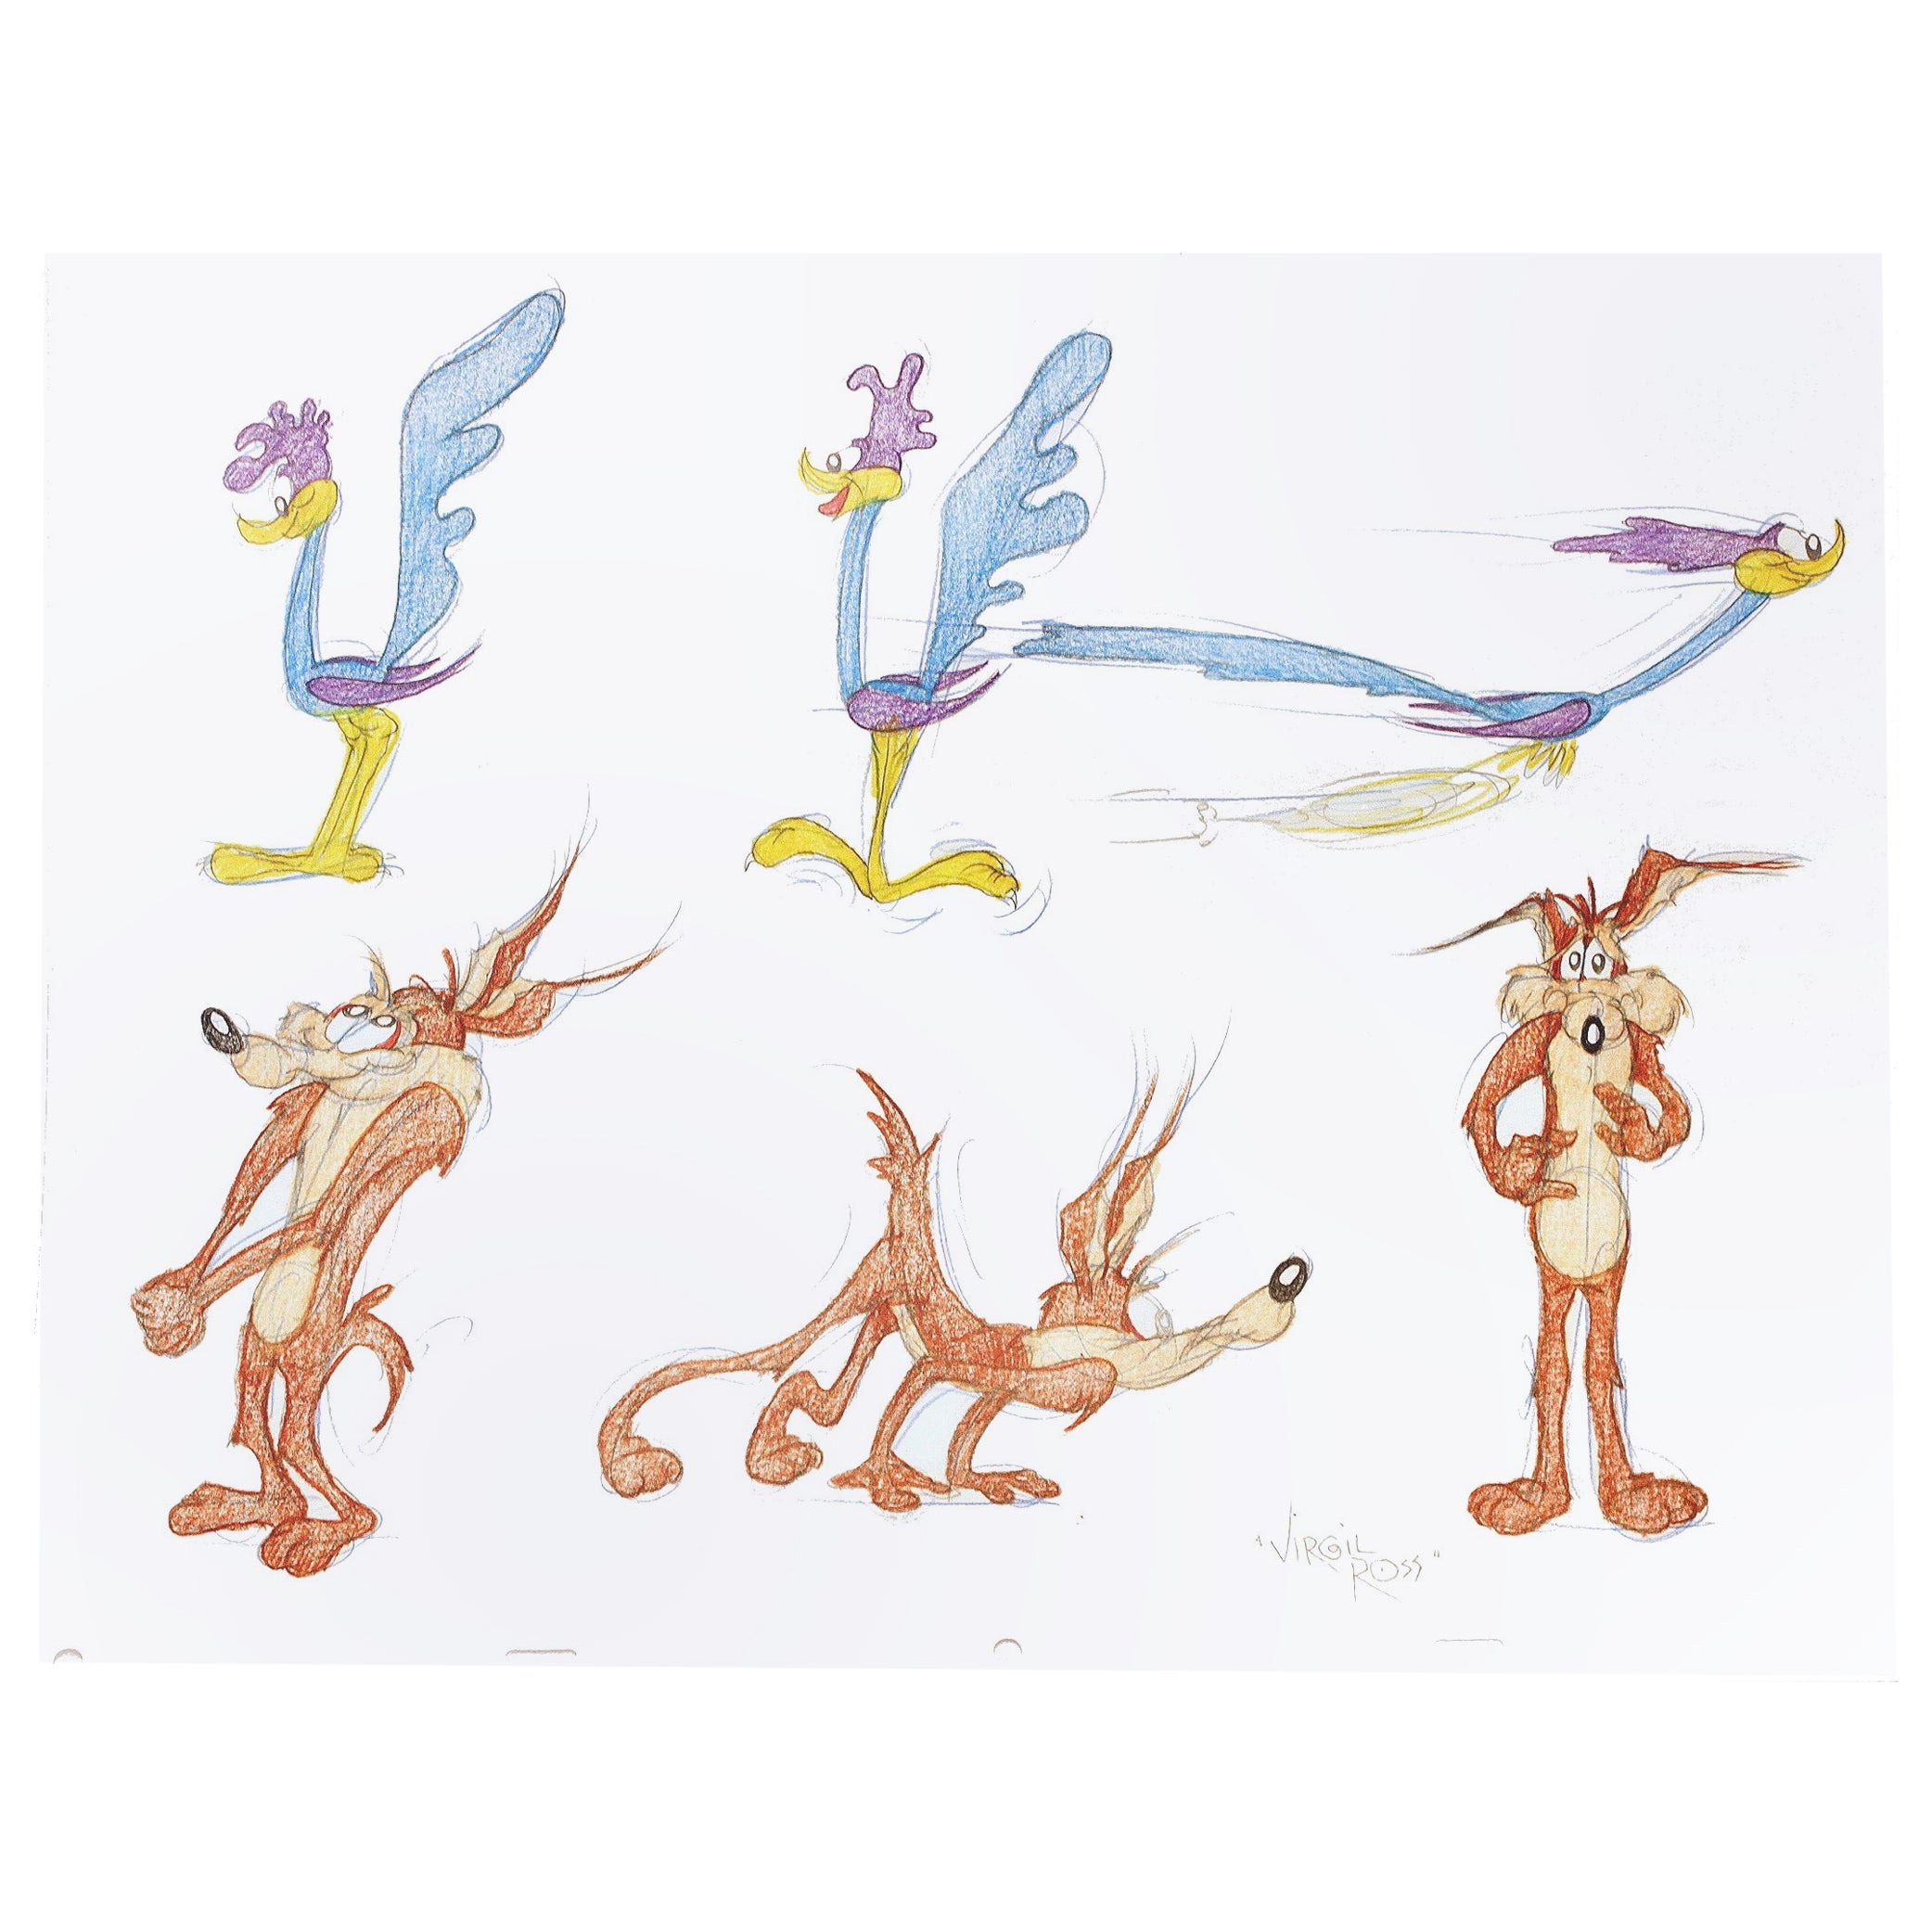 6 ORIGINAL DRAWINGS OF THE ROAD RUNNER & WILE E. COYOTE - Signed By Virgil Ross